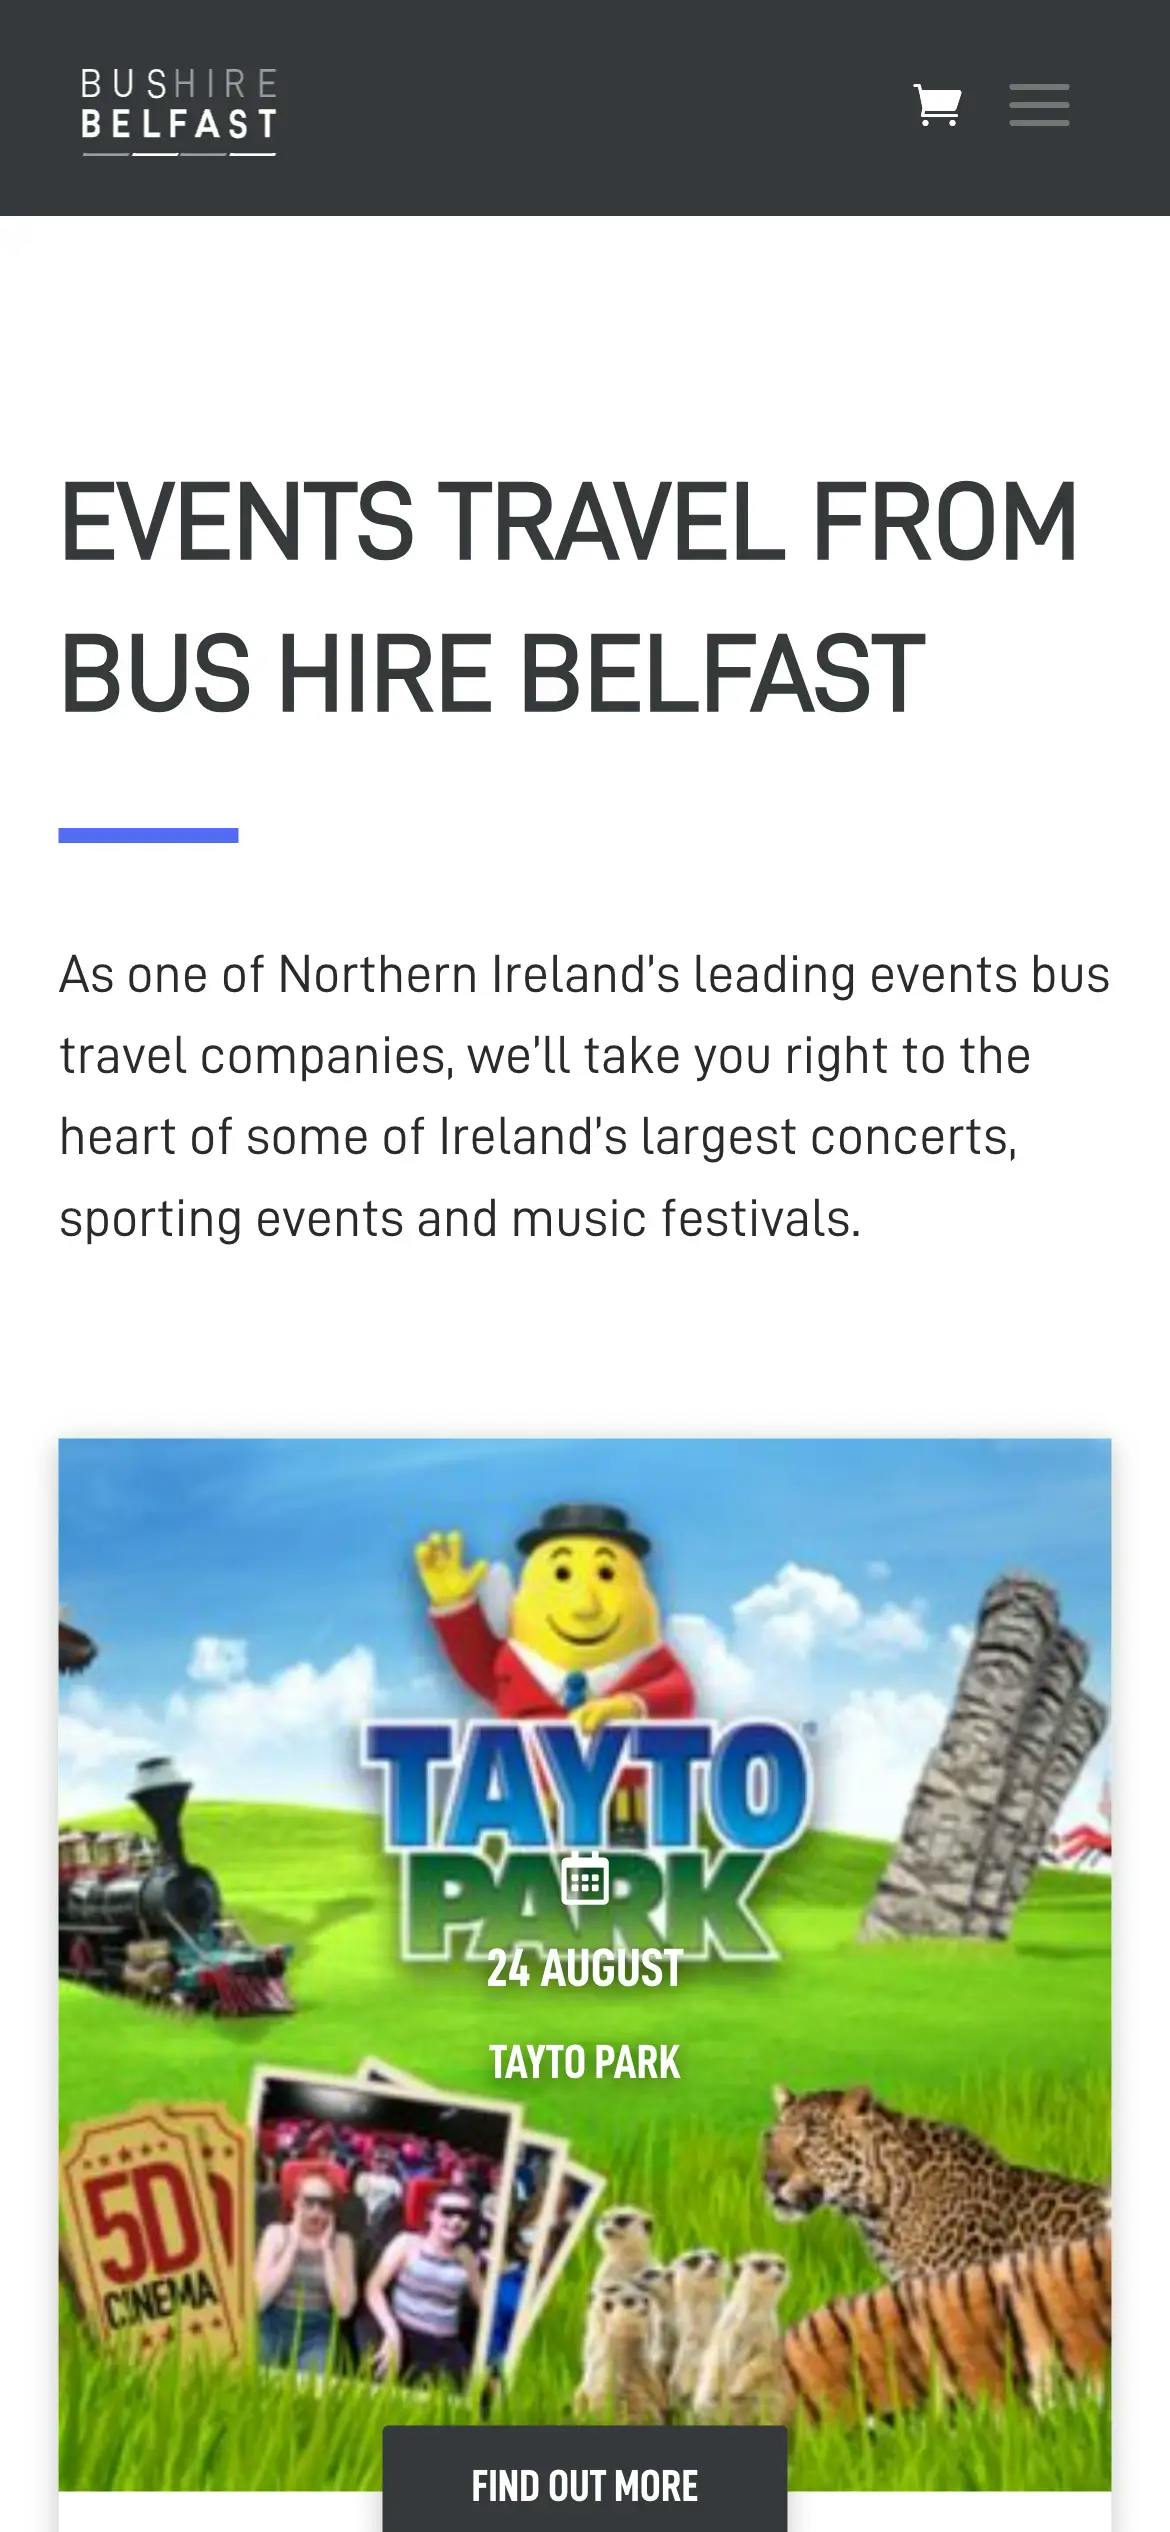 Bus Hire Belfast events page website design on mobile